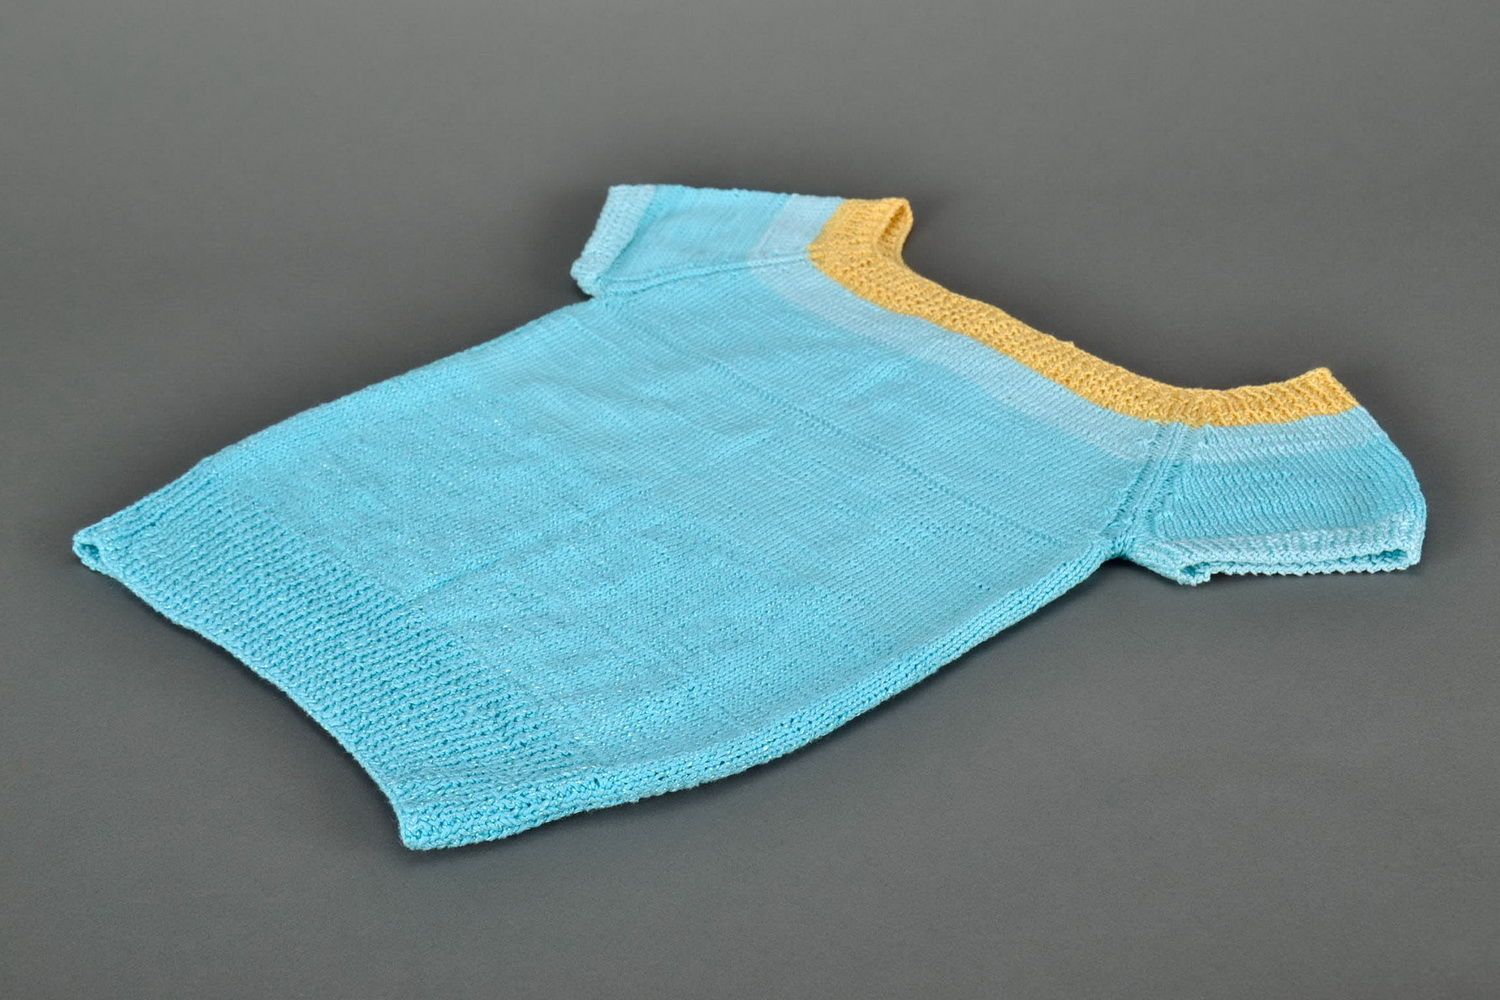 Children's sweater knitted with needles photo 1